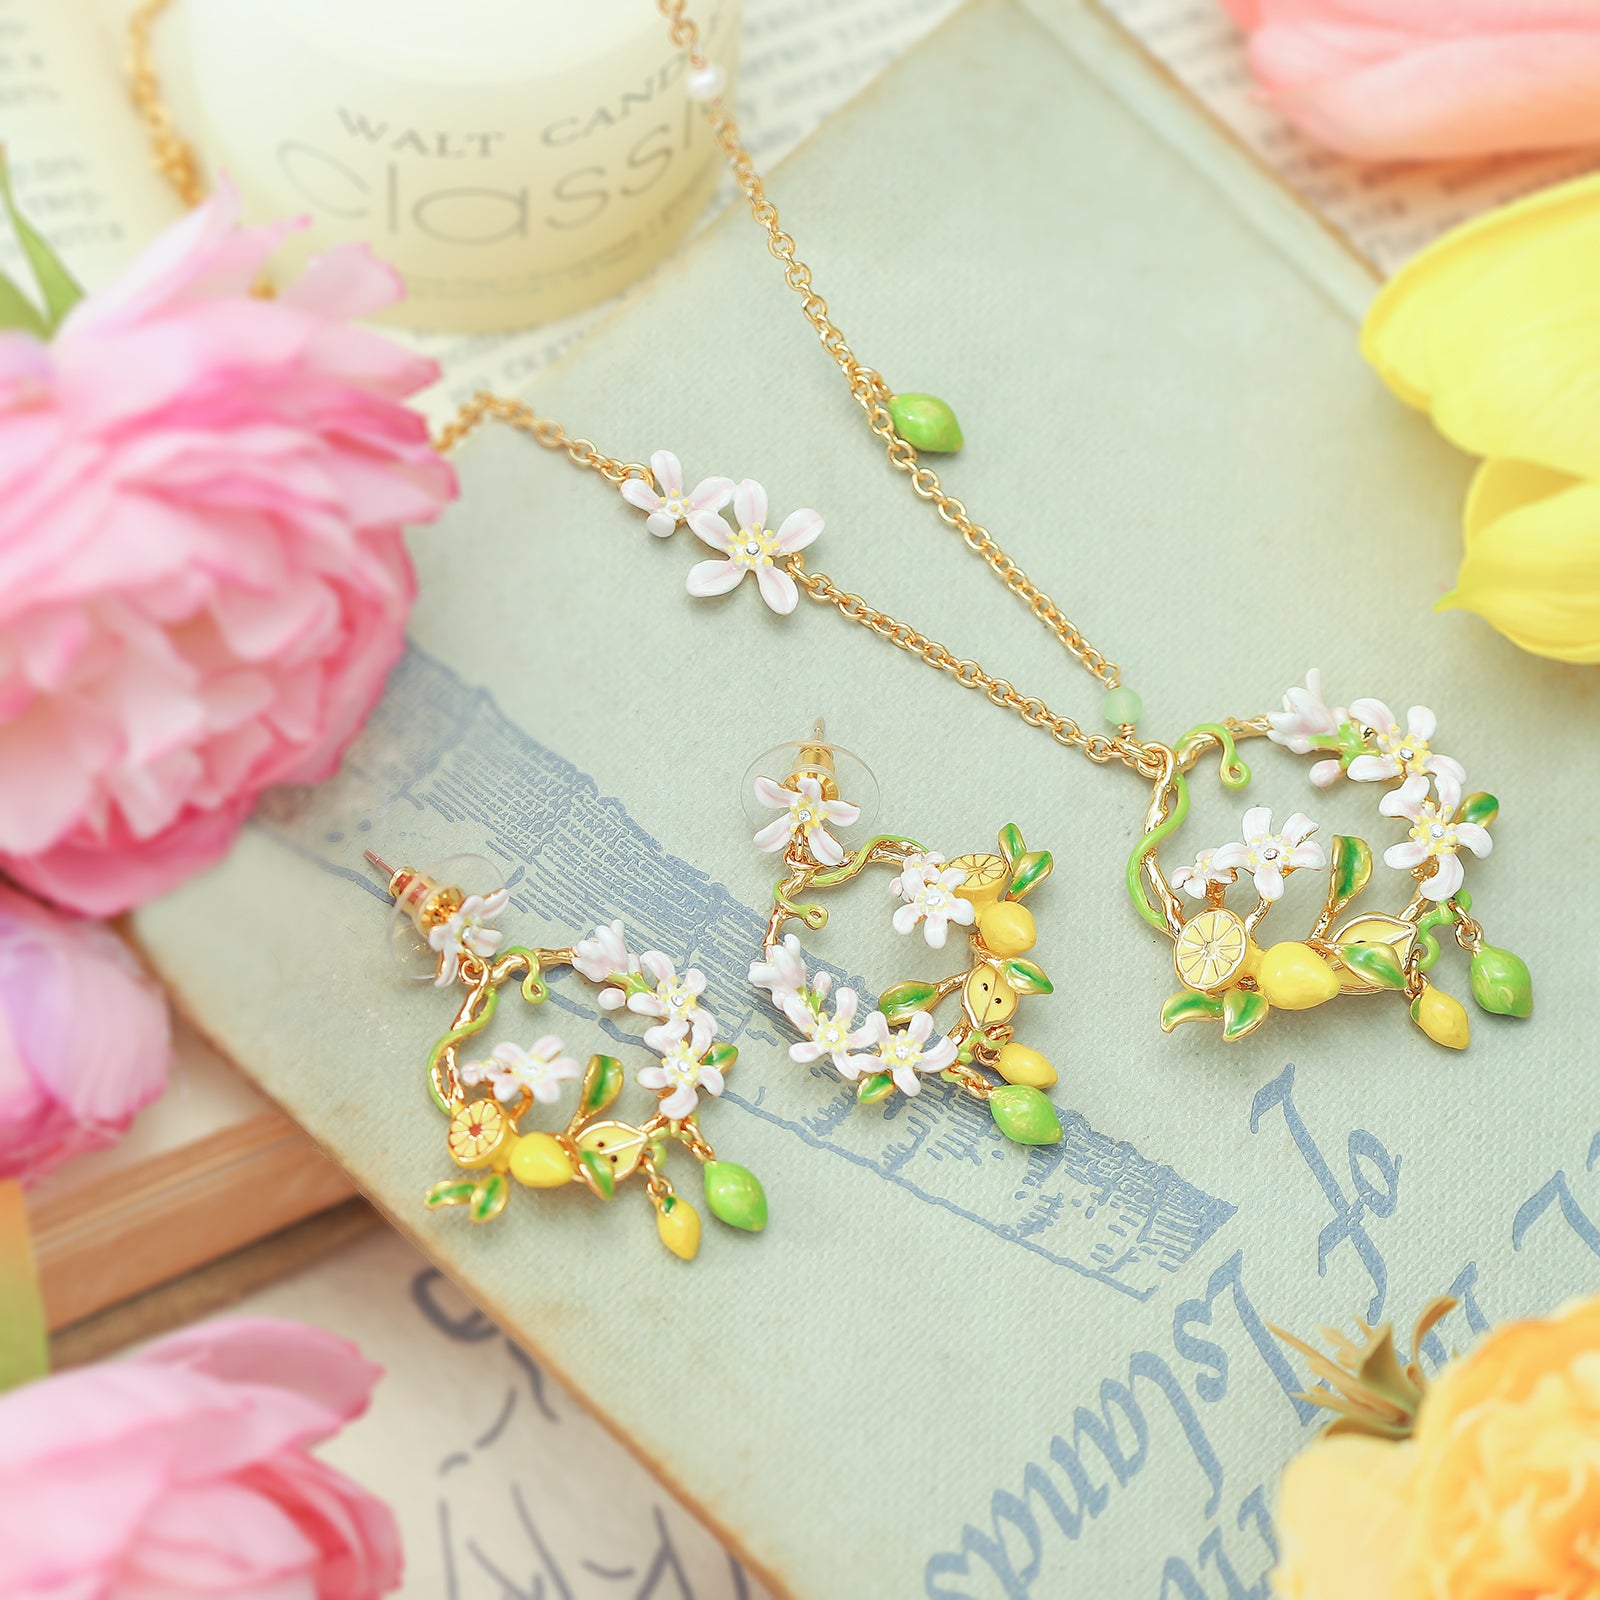 Lemon Garland Earrings and Necklace